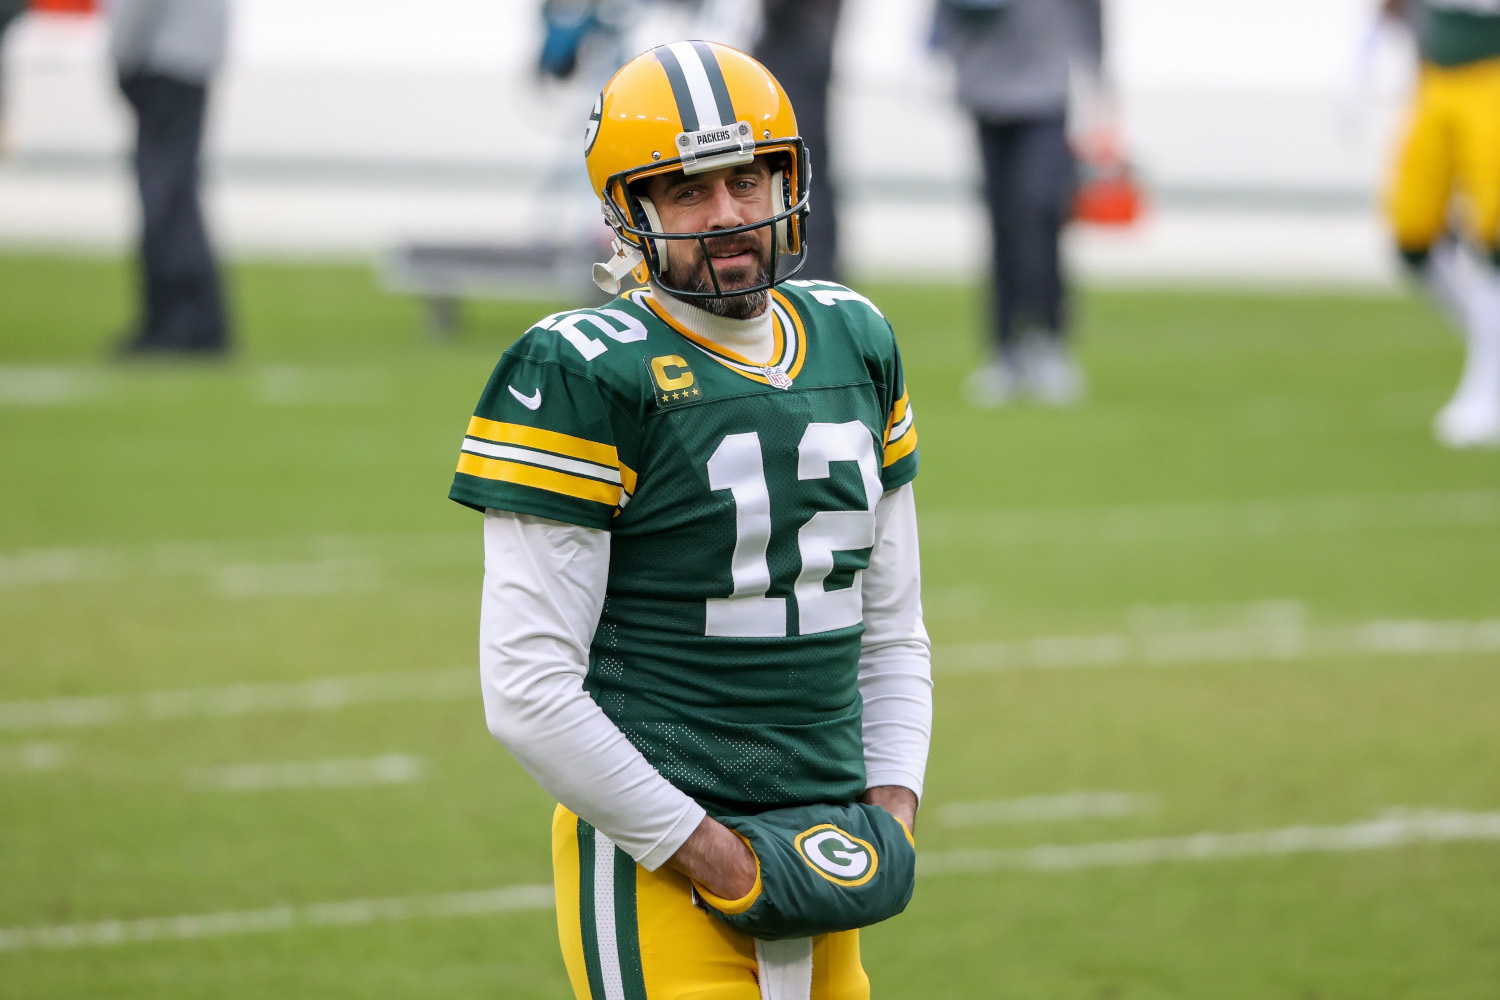 Aaron Rodgers Drama Has Packers GM Brian Gutekunst Scrambling to Add QBs